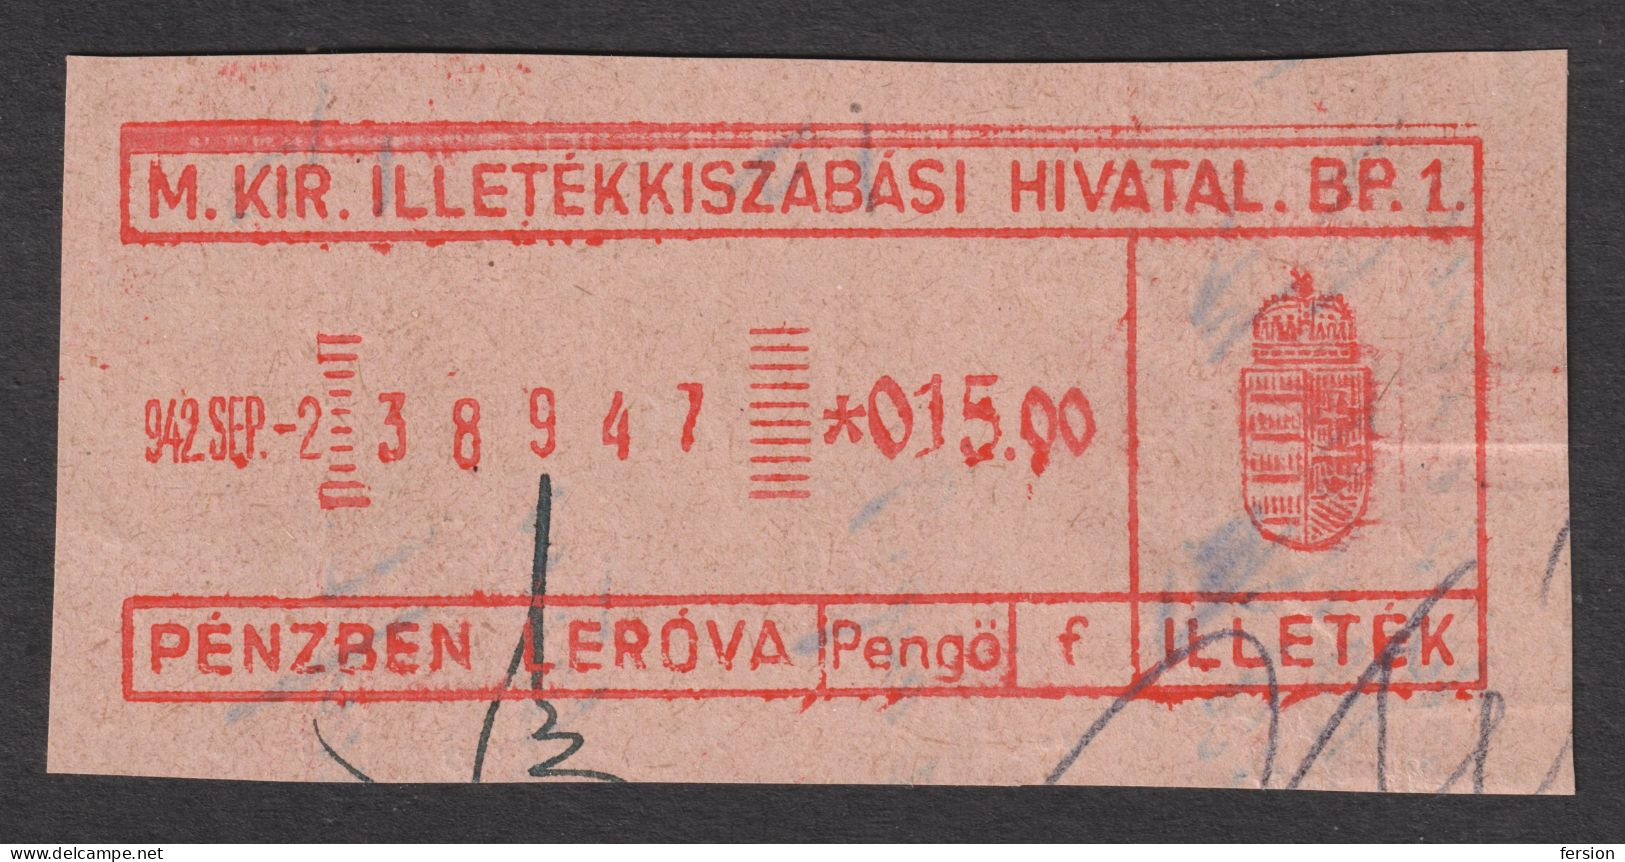 Francotyp Cut -  REVENUE Fiscal TAX Stripe Seal - Used - HUNGARY 1942 - BUDAPEST - Coat Of Arms - Fiscales